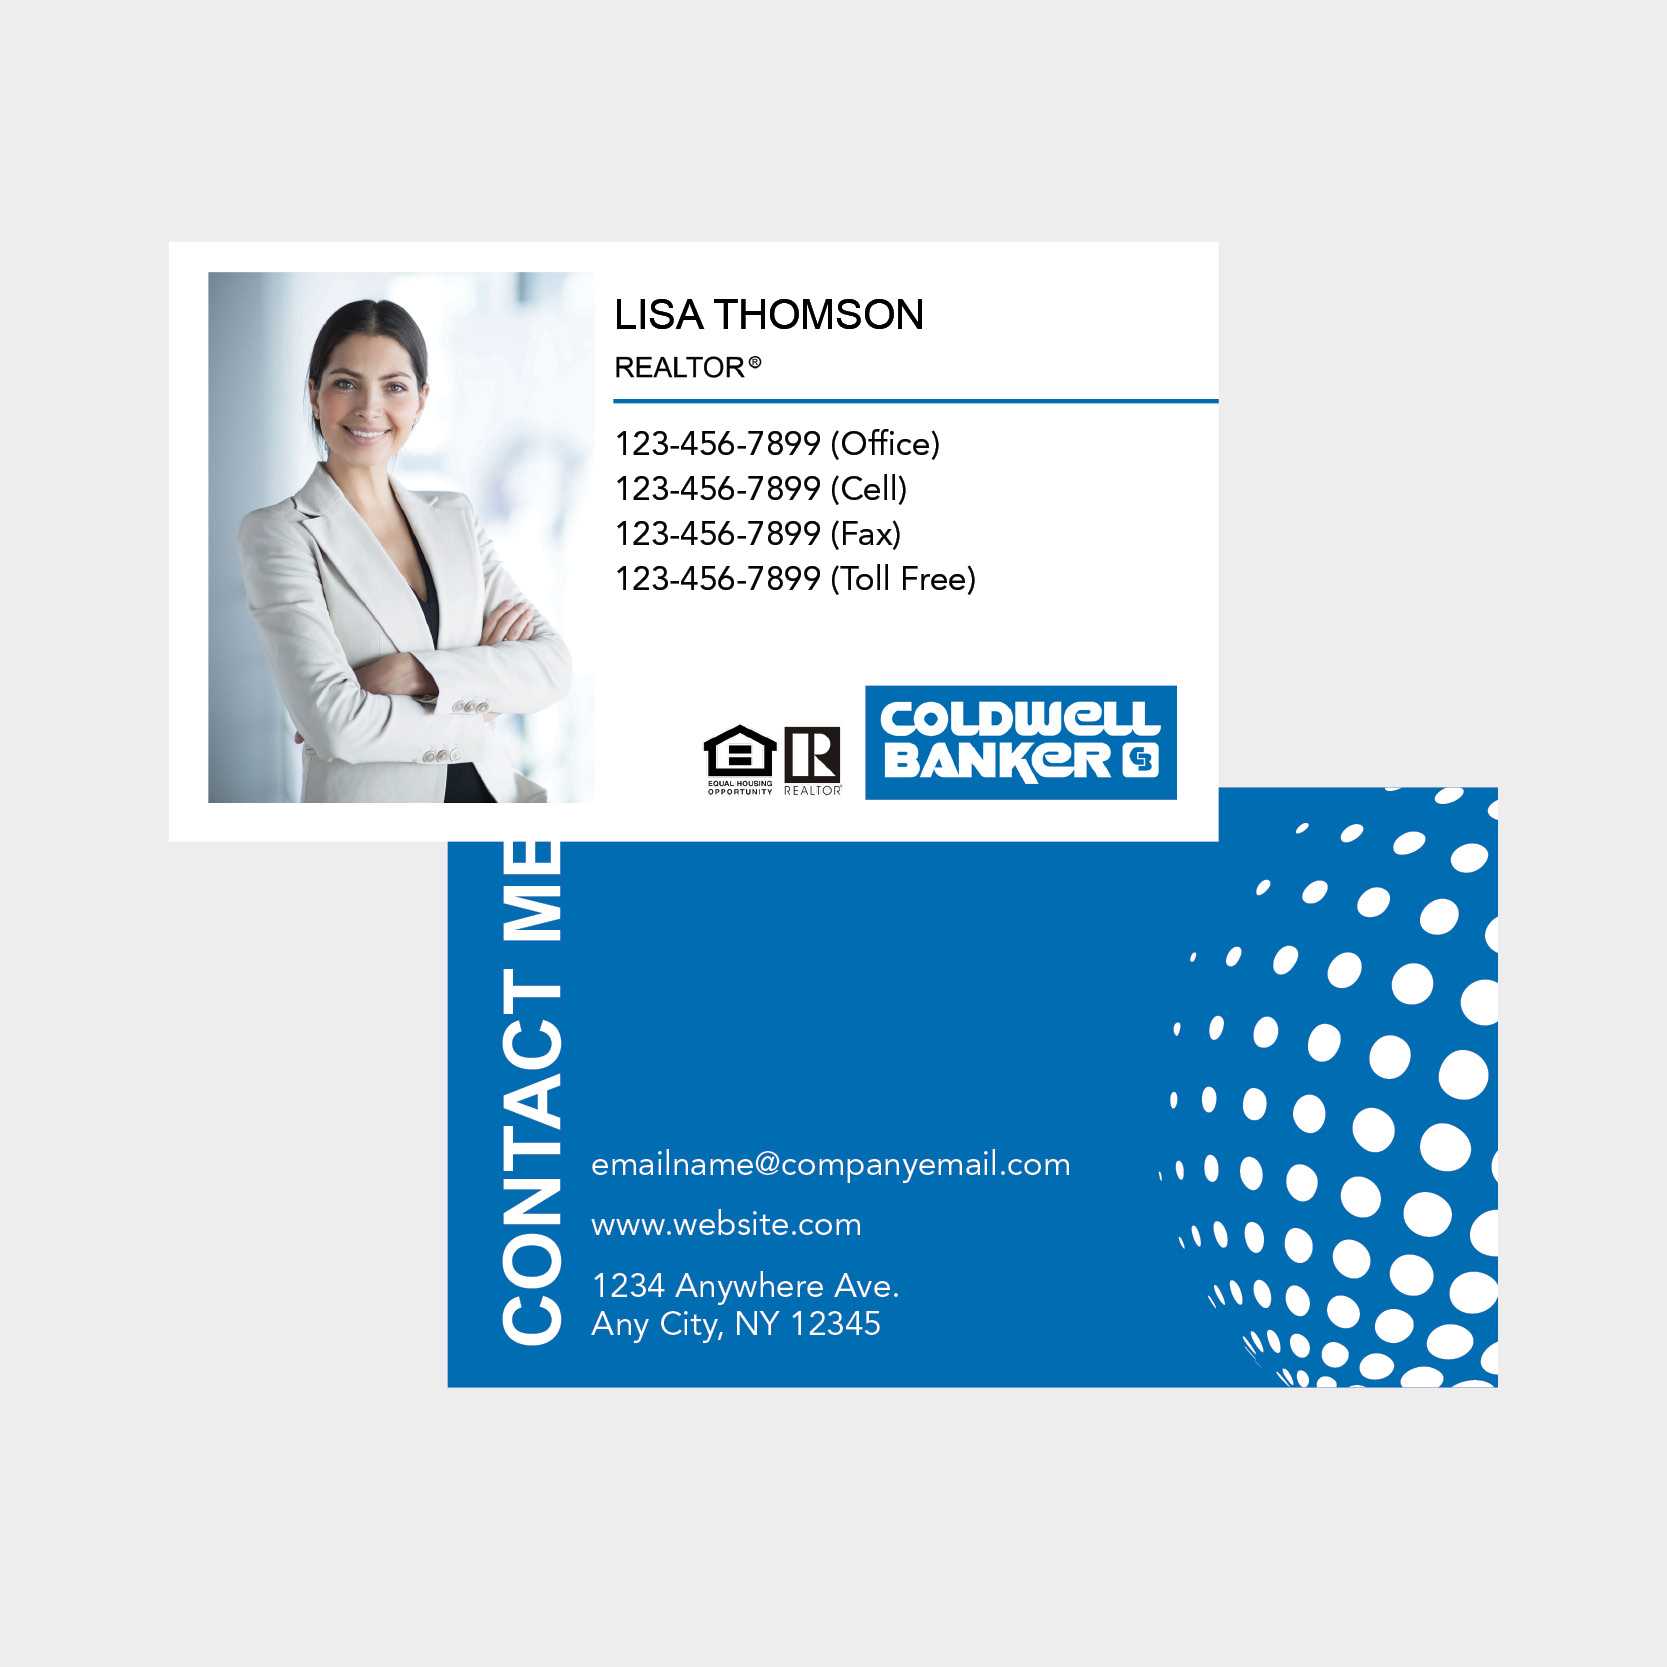 Coldwell Banker Business Card Throughout Coldwell Banker Business Card Template